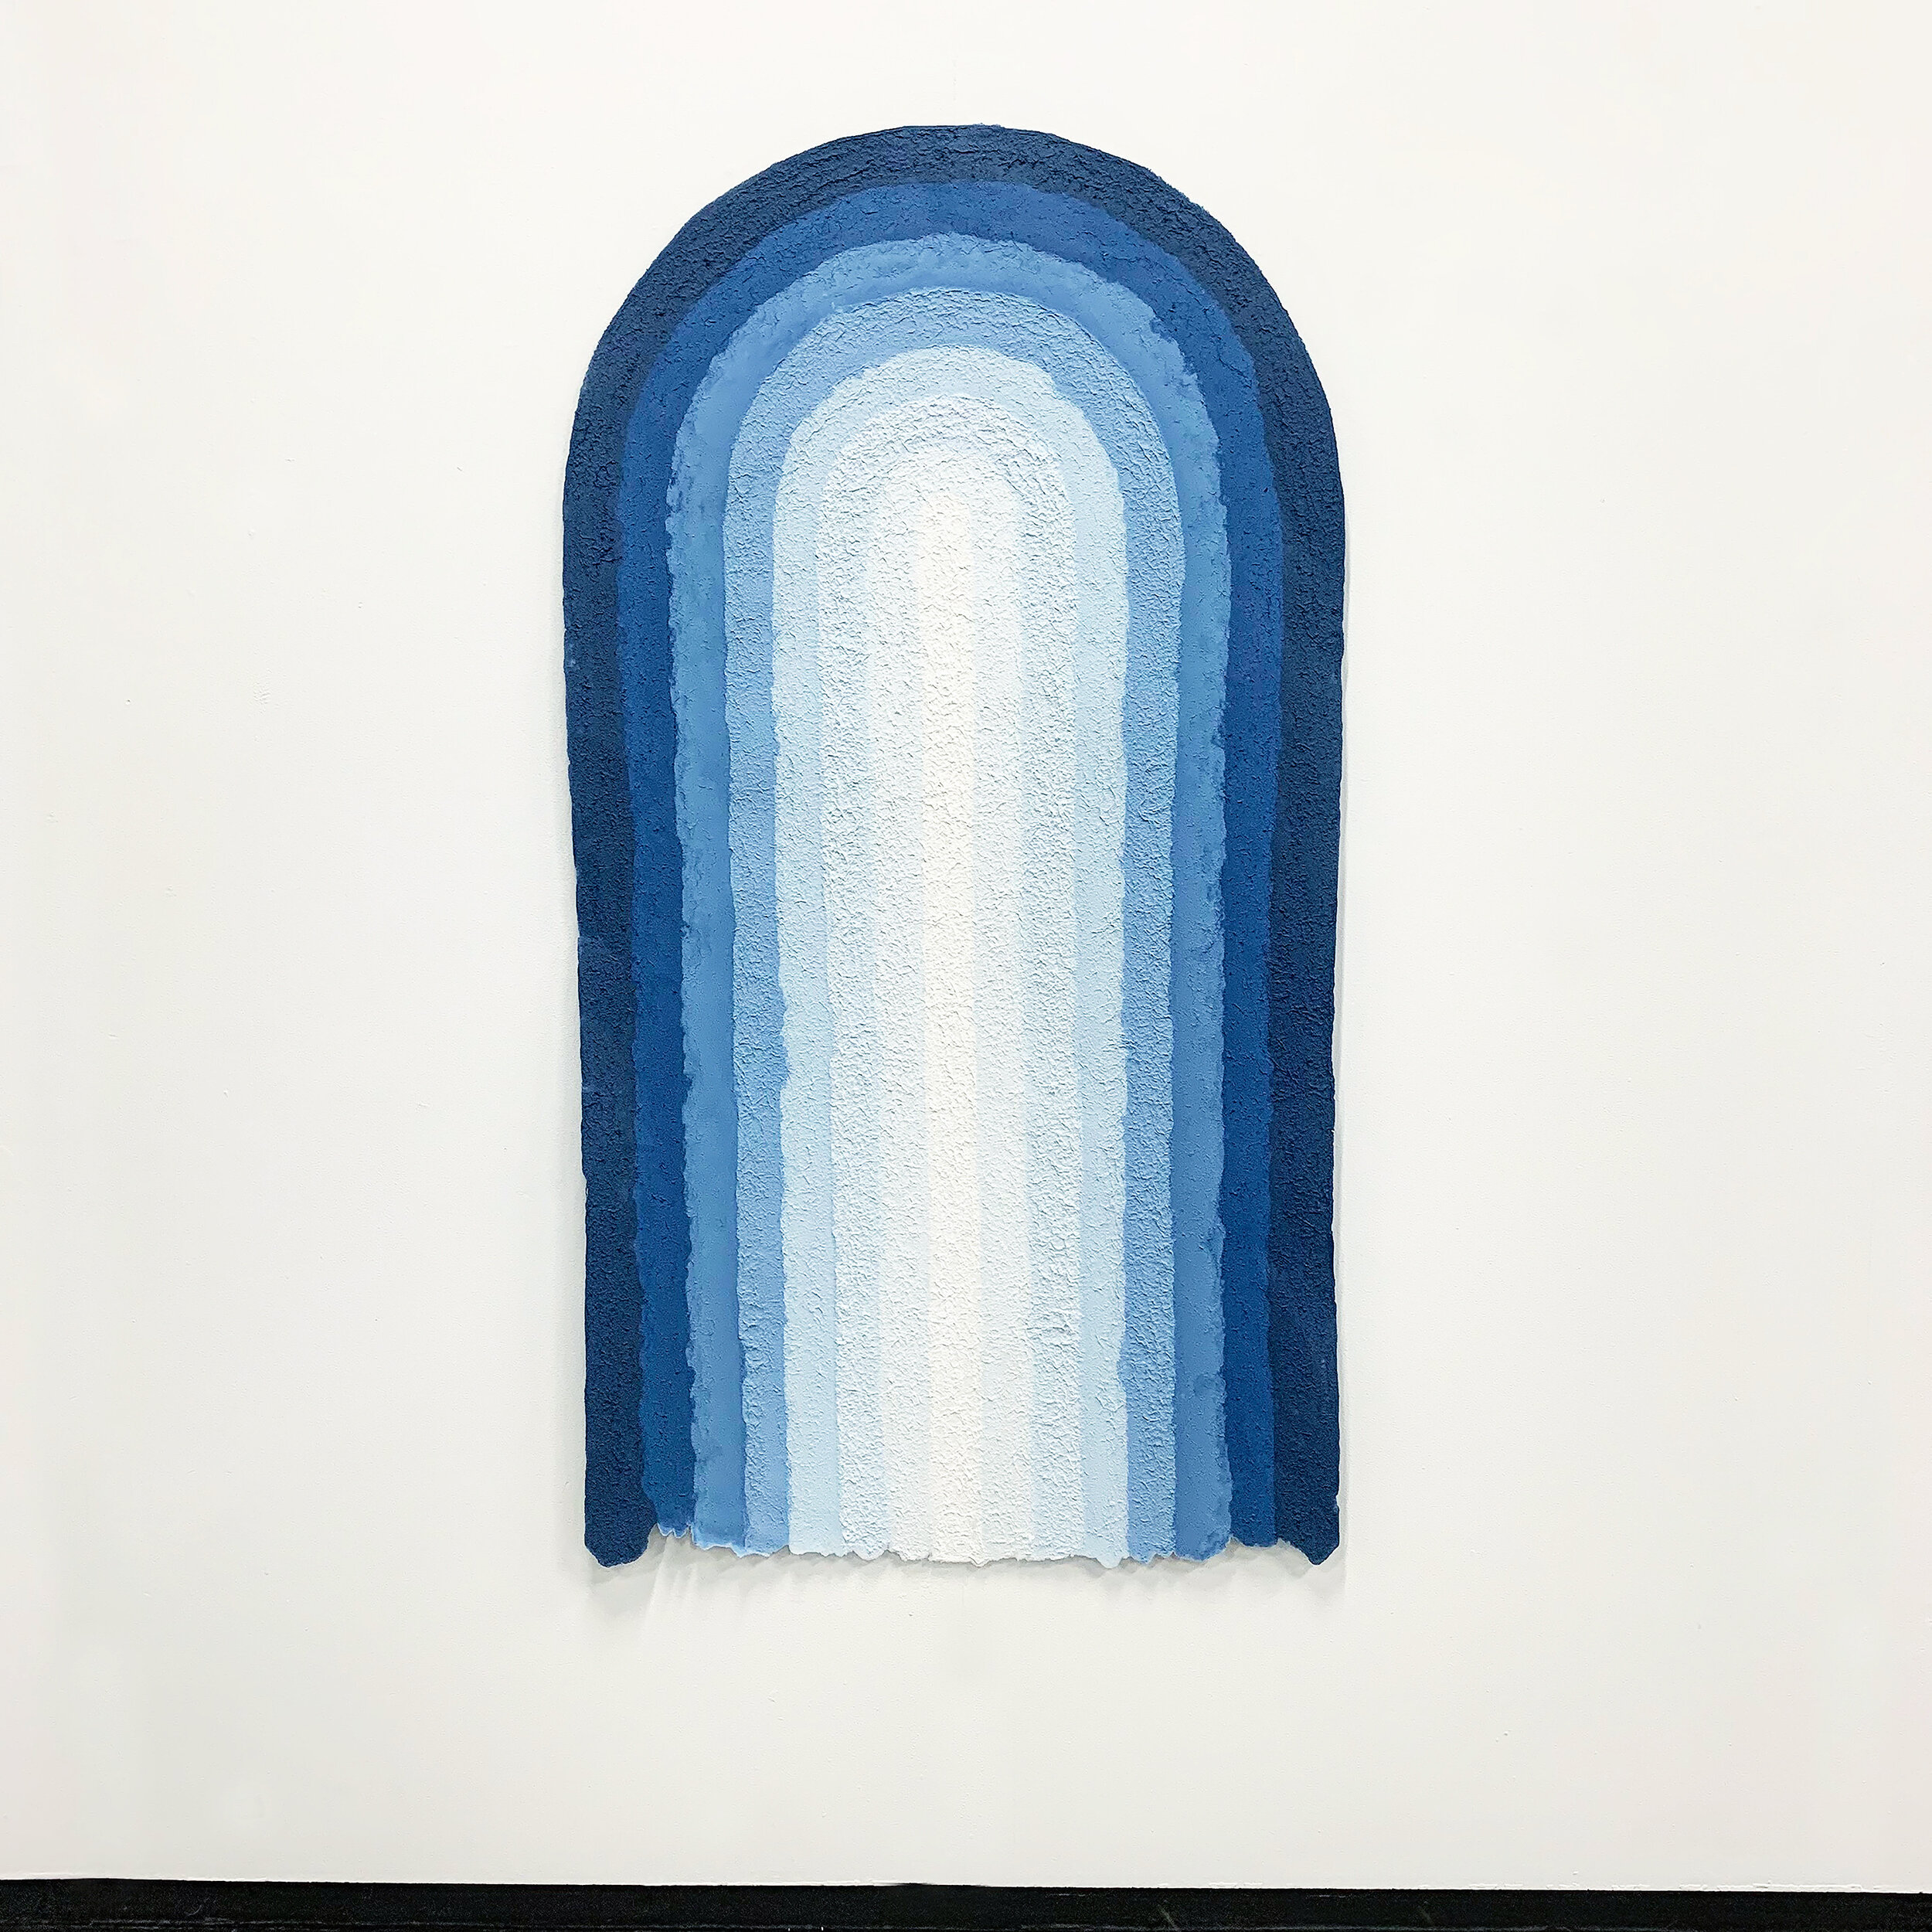    Softest hard  #2  , 2019.   Hand-made paper, from indigo-dyed salvaged textiles (cotton bedsheets). 76cm (w) x 140cm (h) 